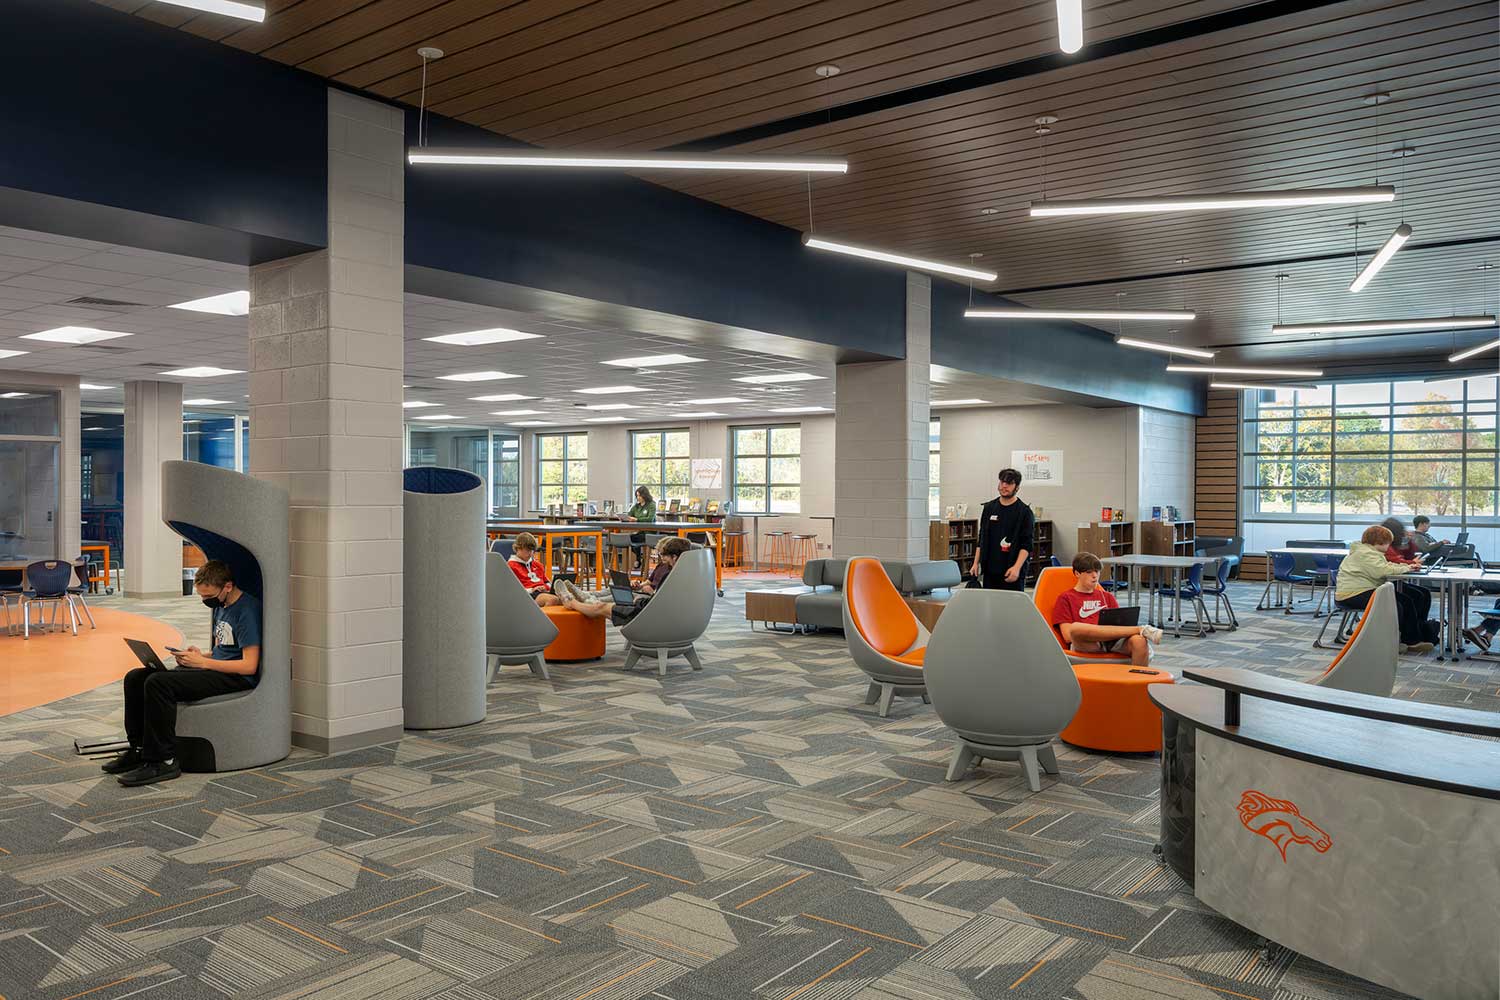 School library with gray floors and orange/gray chairs